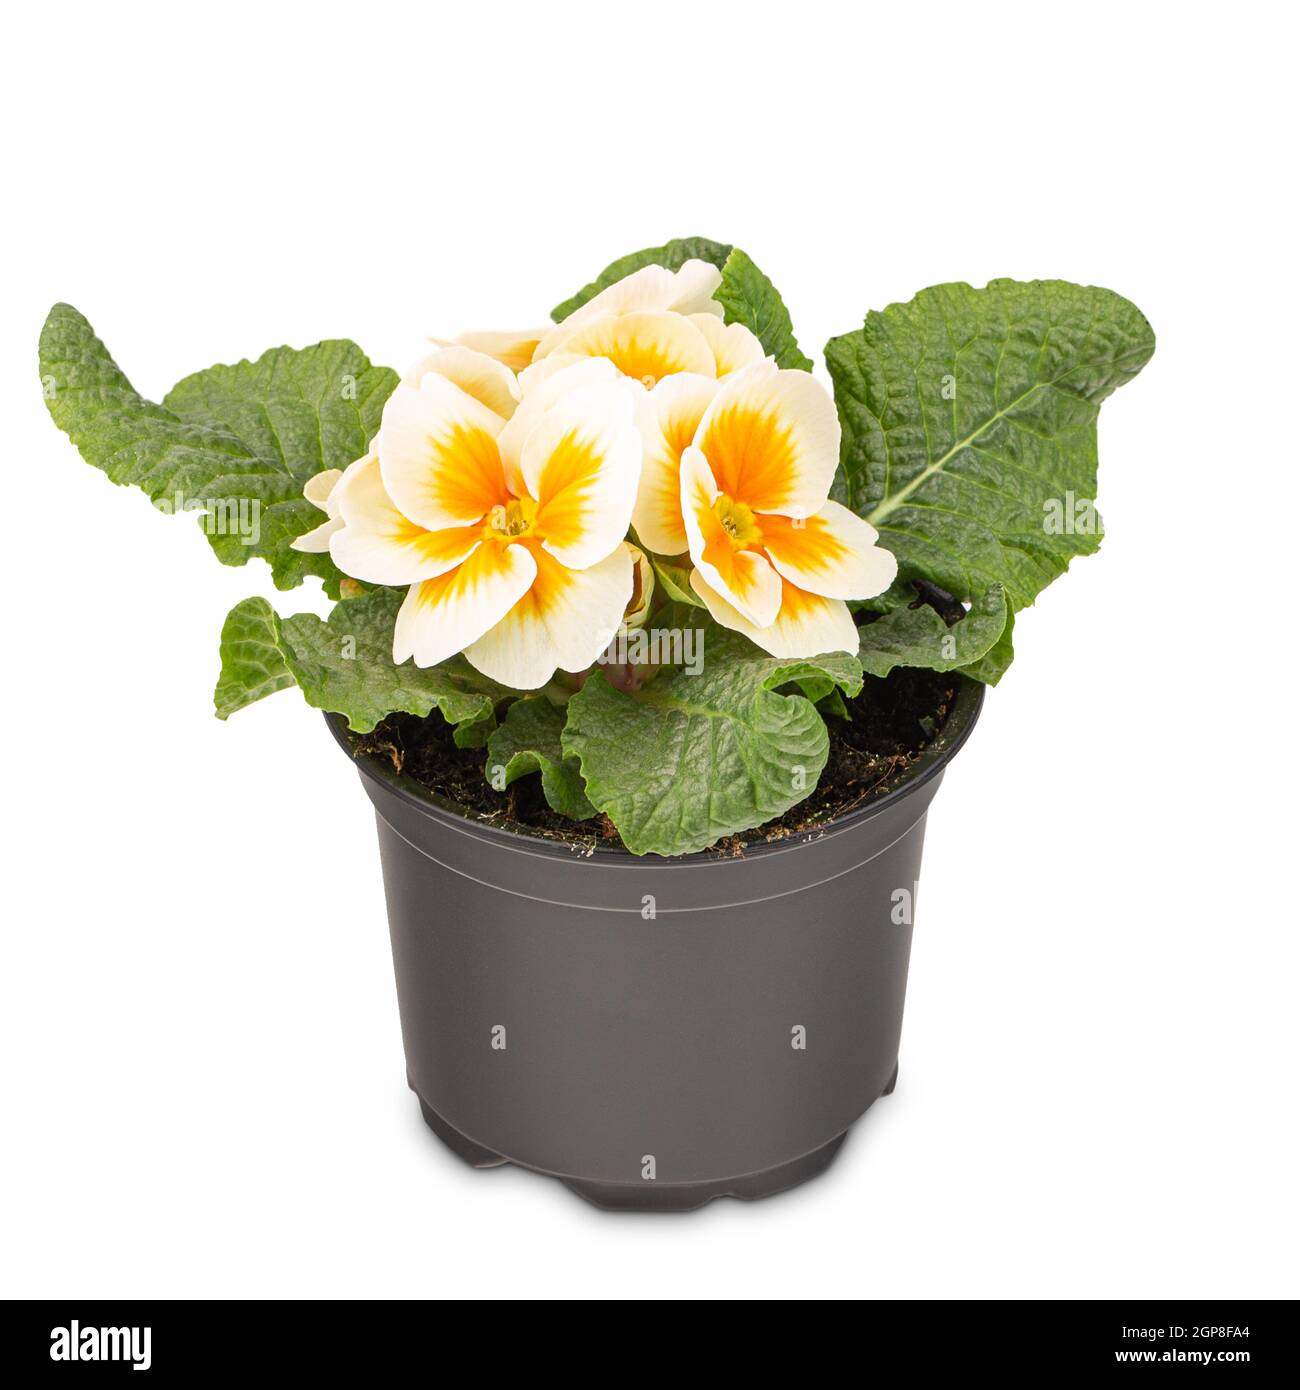 White primroses flower or primula vulgaris with orange centres in a flowerpot on white background Stock Photo